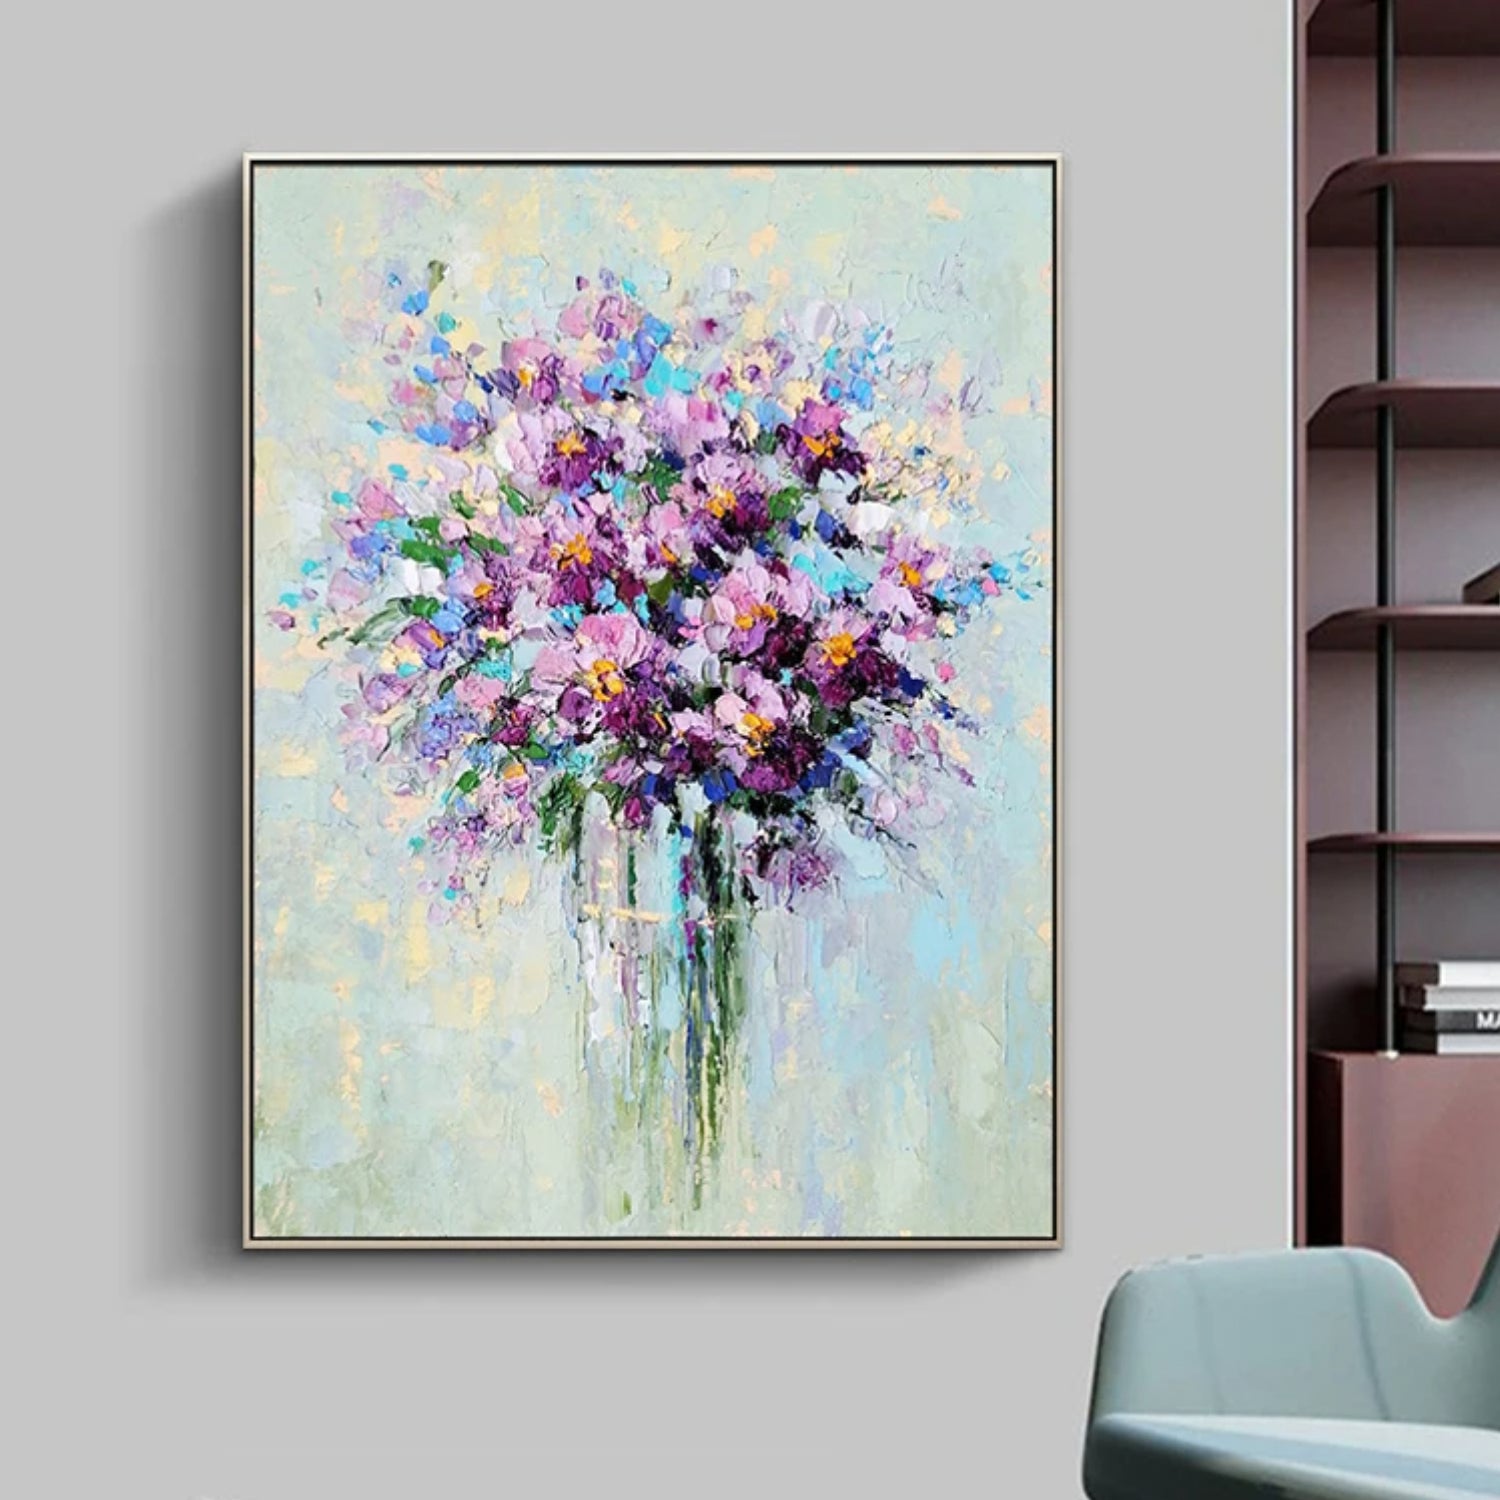 Colourful Textured Floral Bouquet Impressionist Wall Art